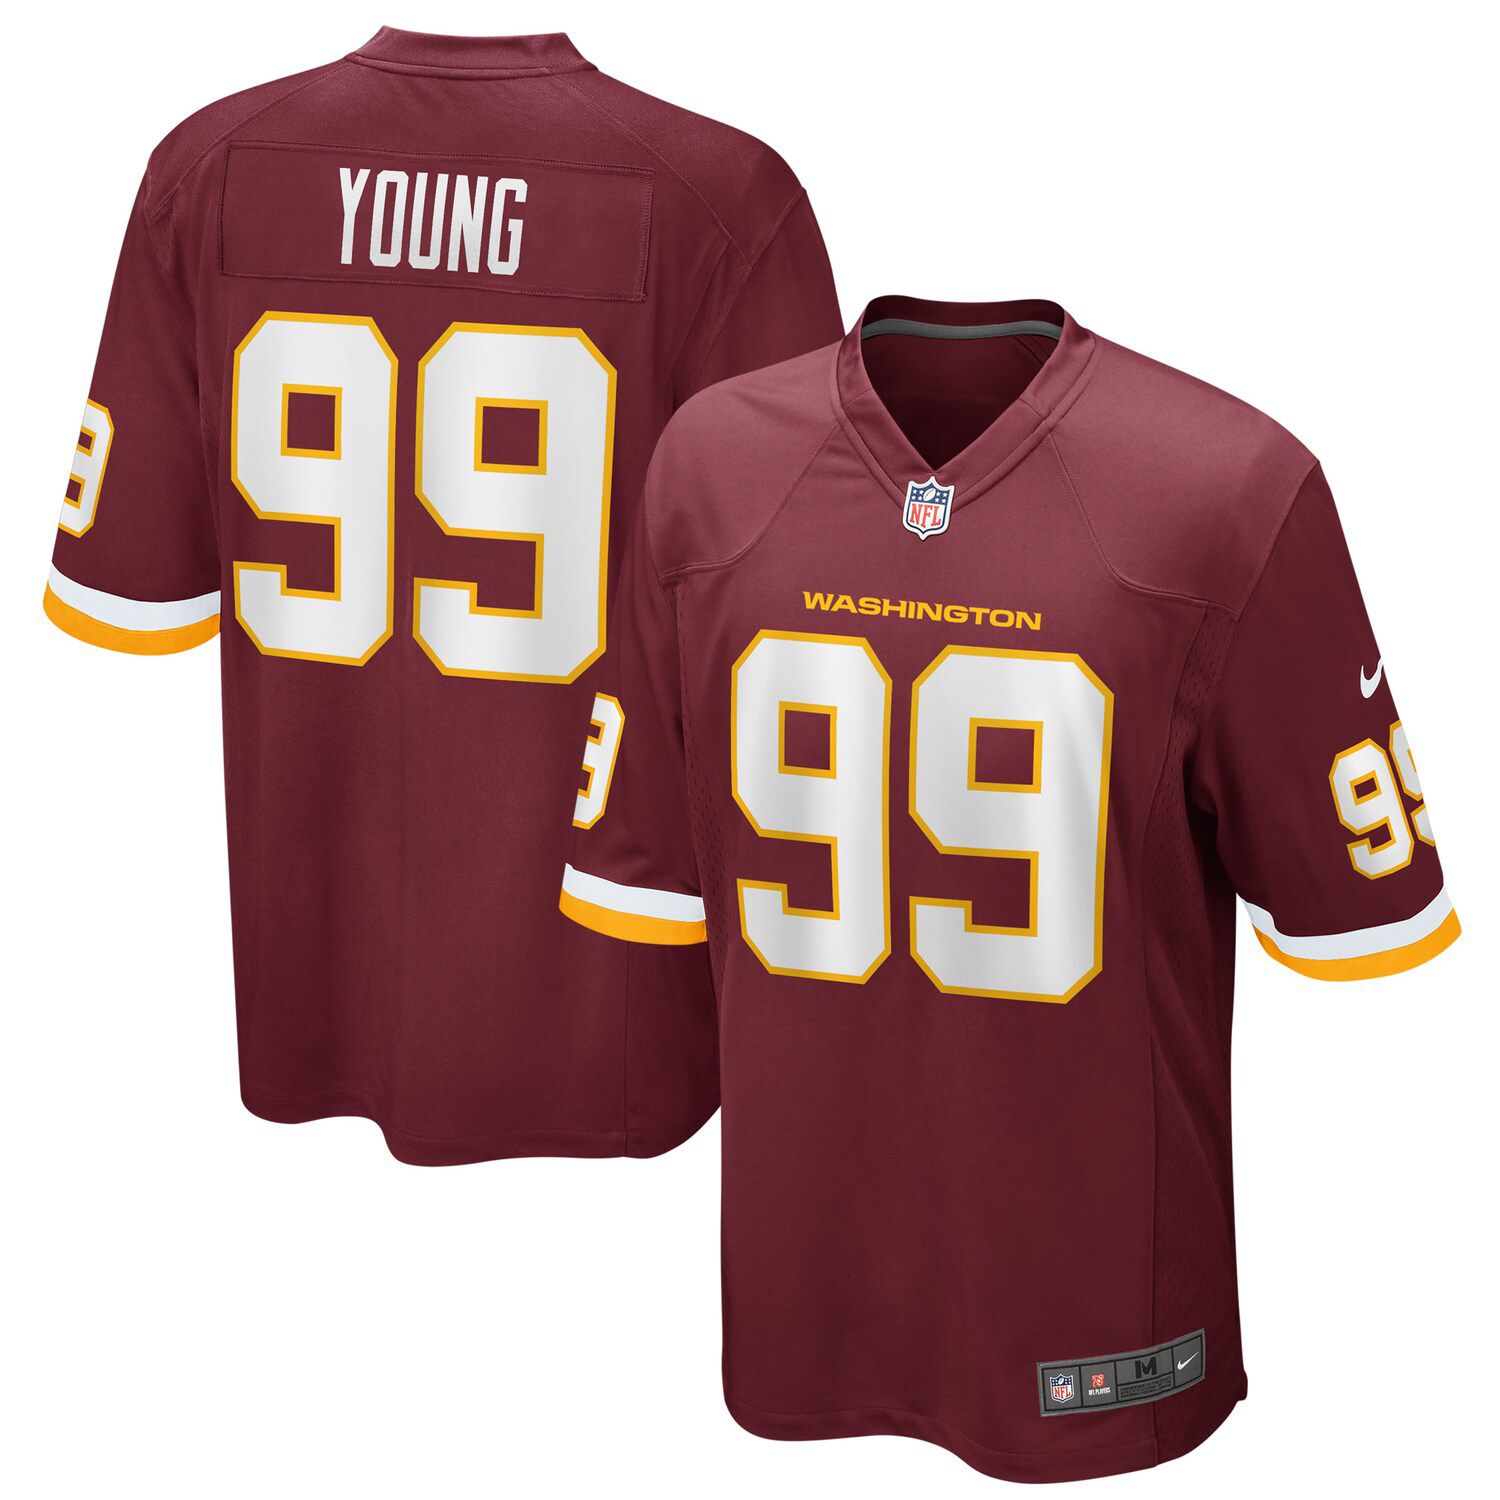 chase young jersey youth